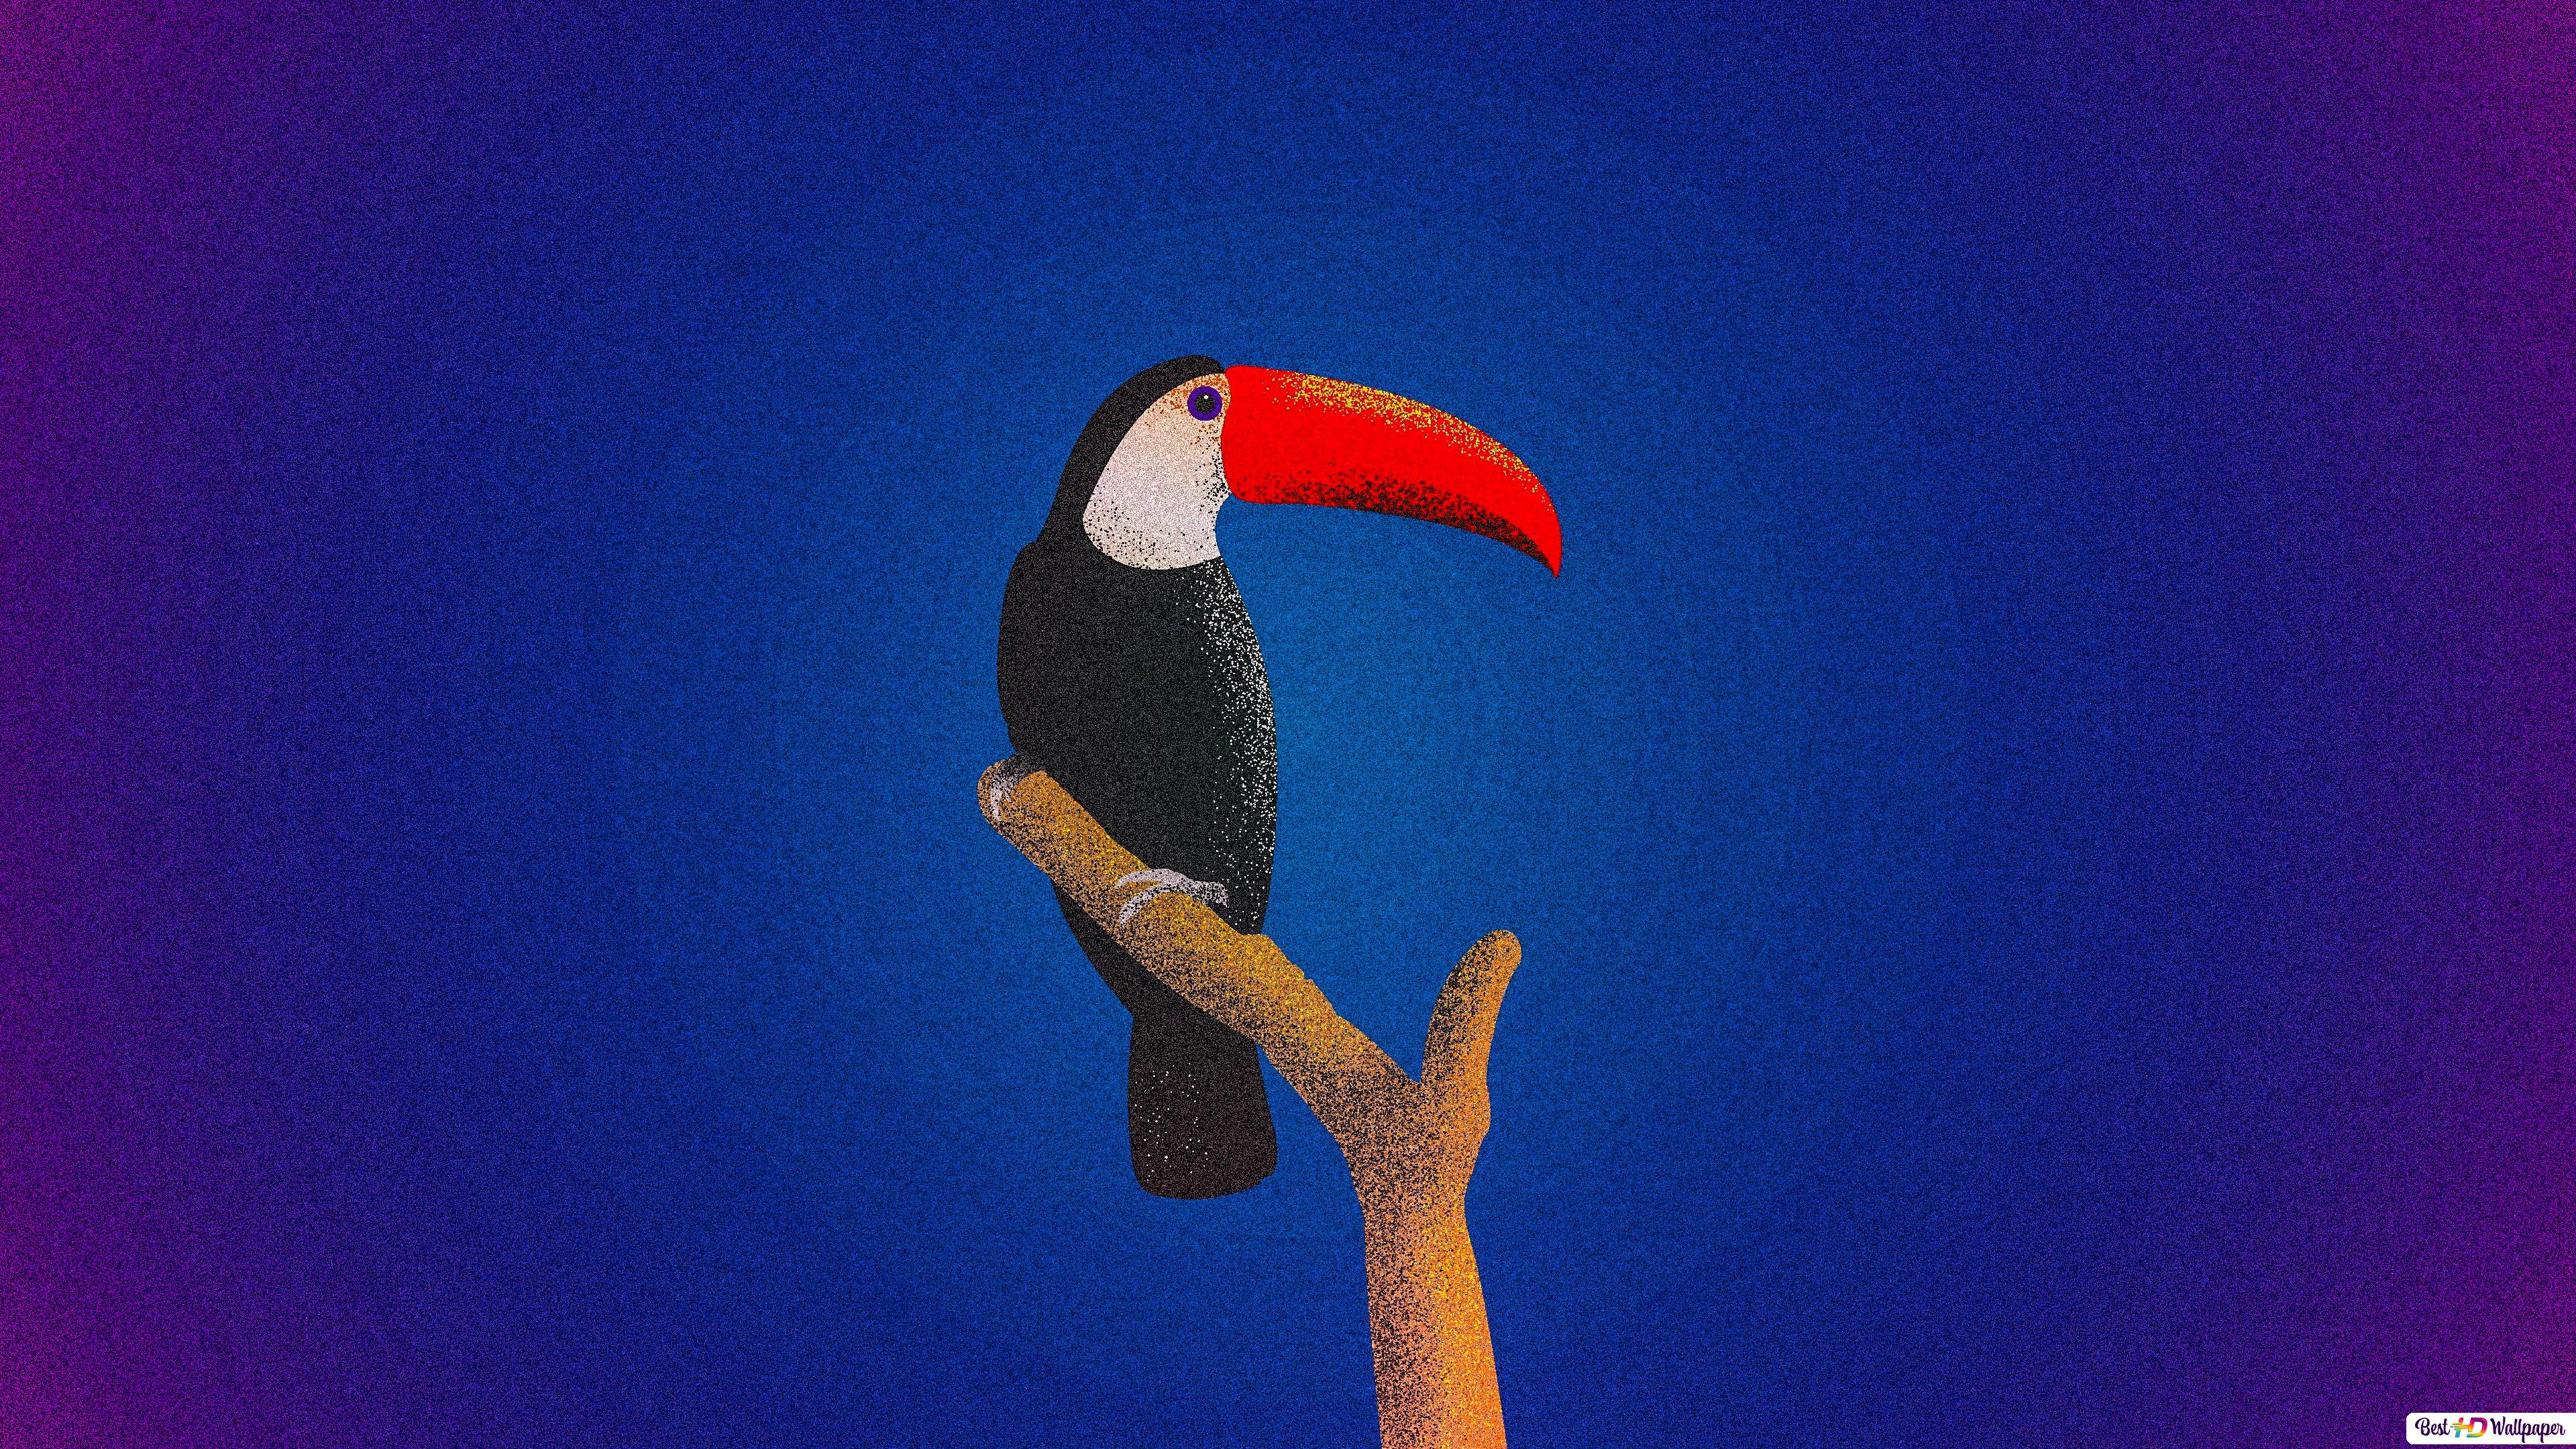 Toco Toucan Wallpapers